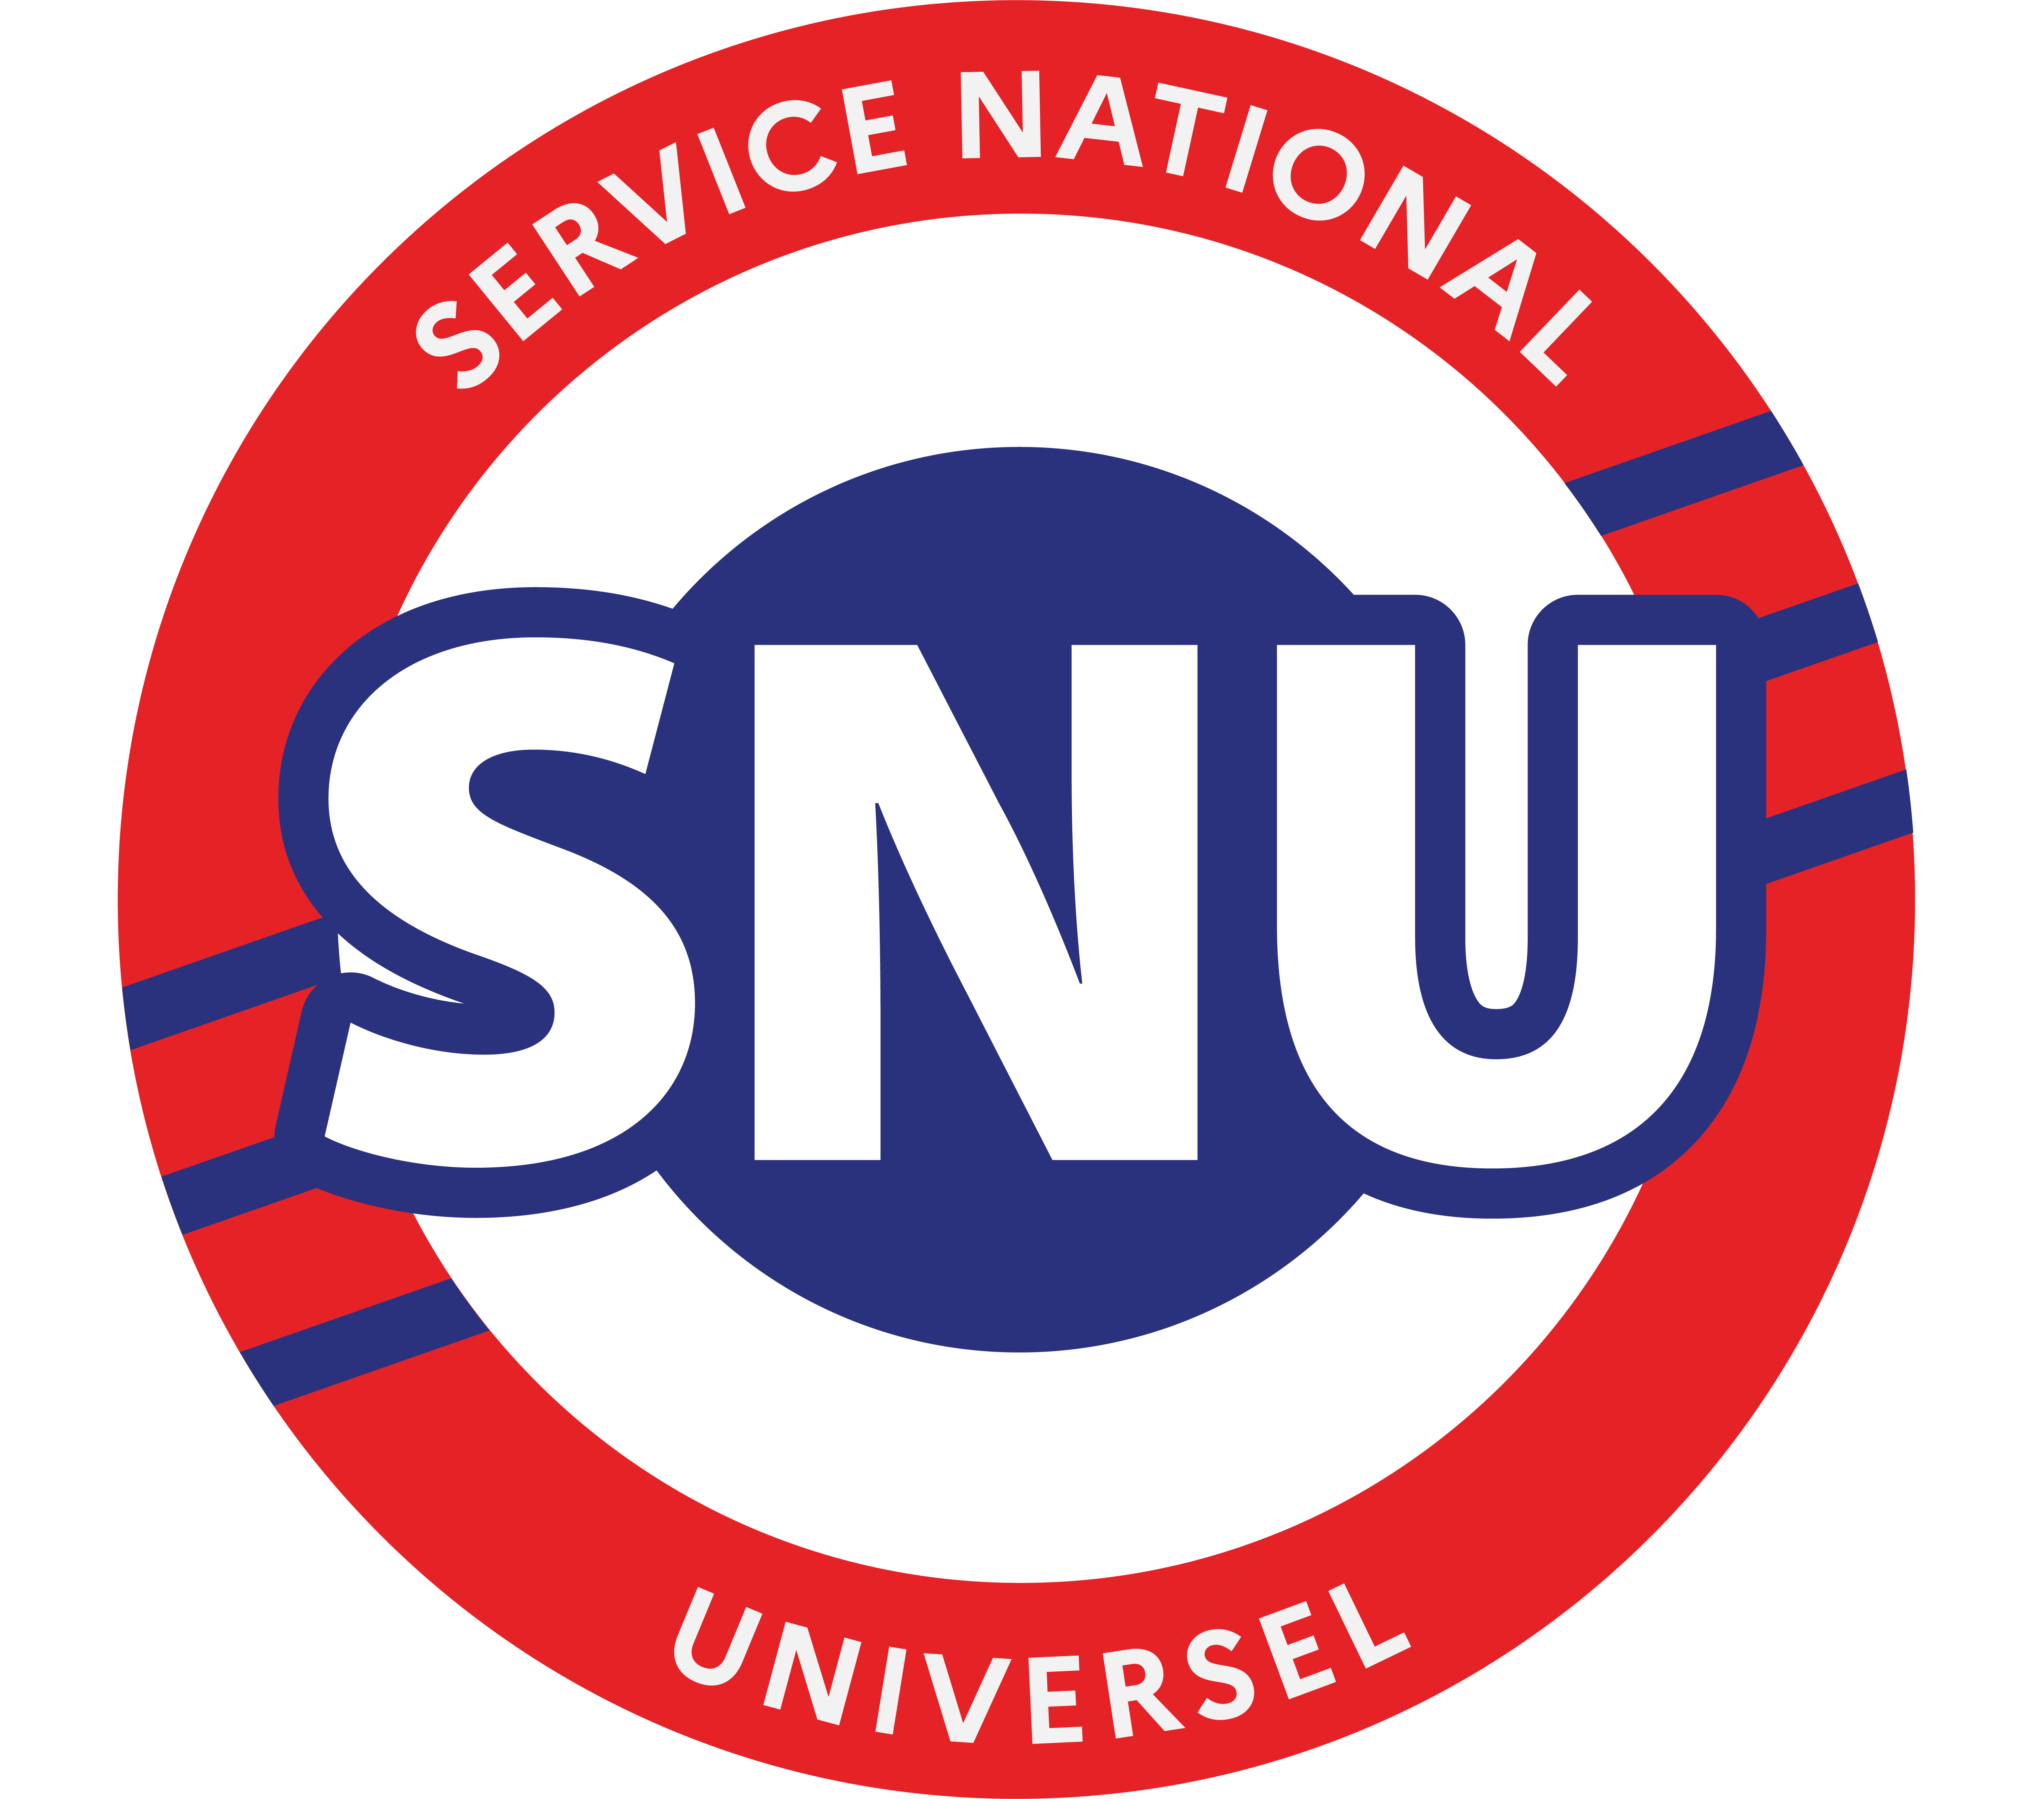 Service national universel